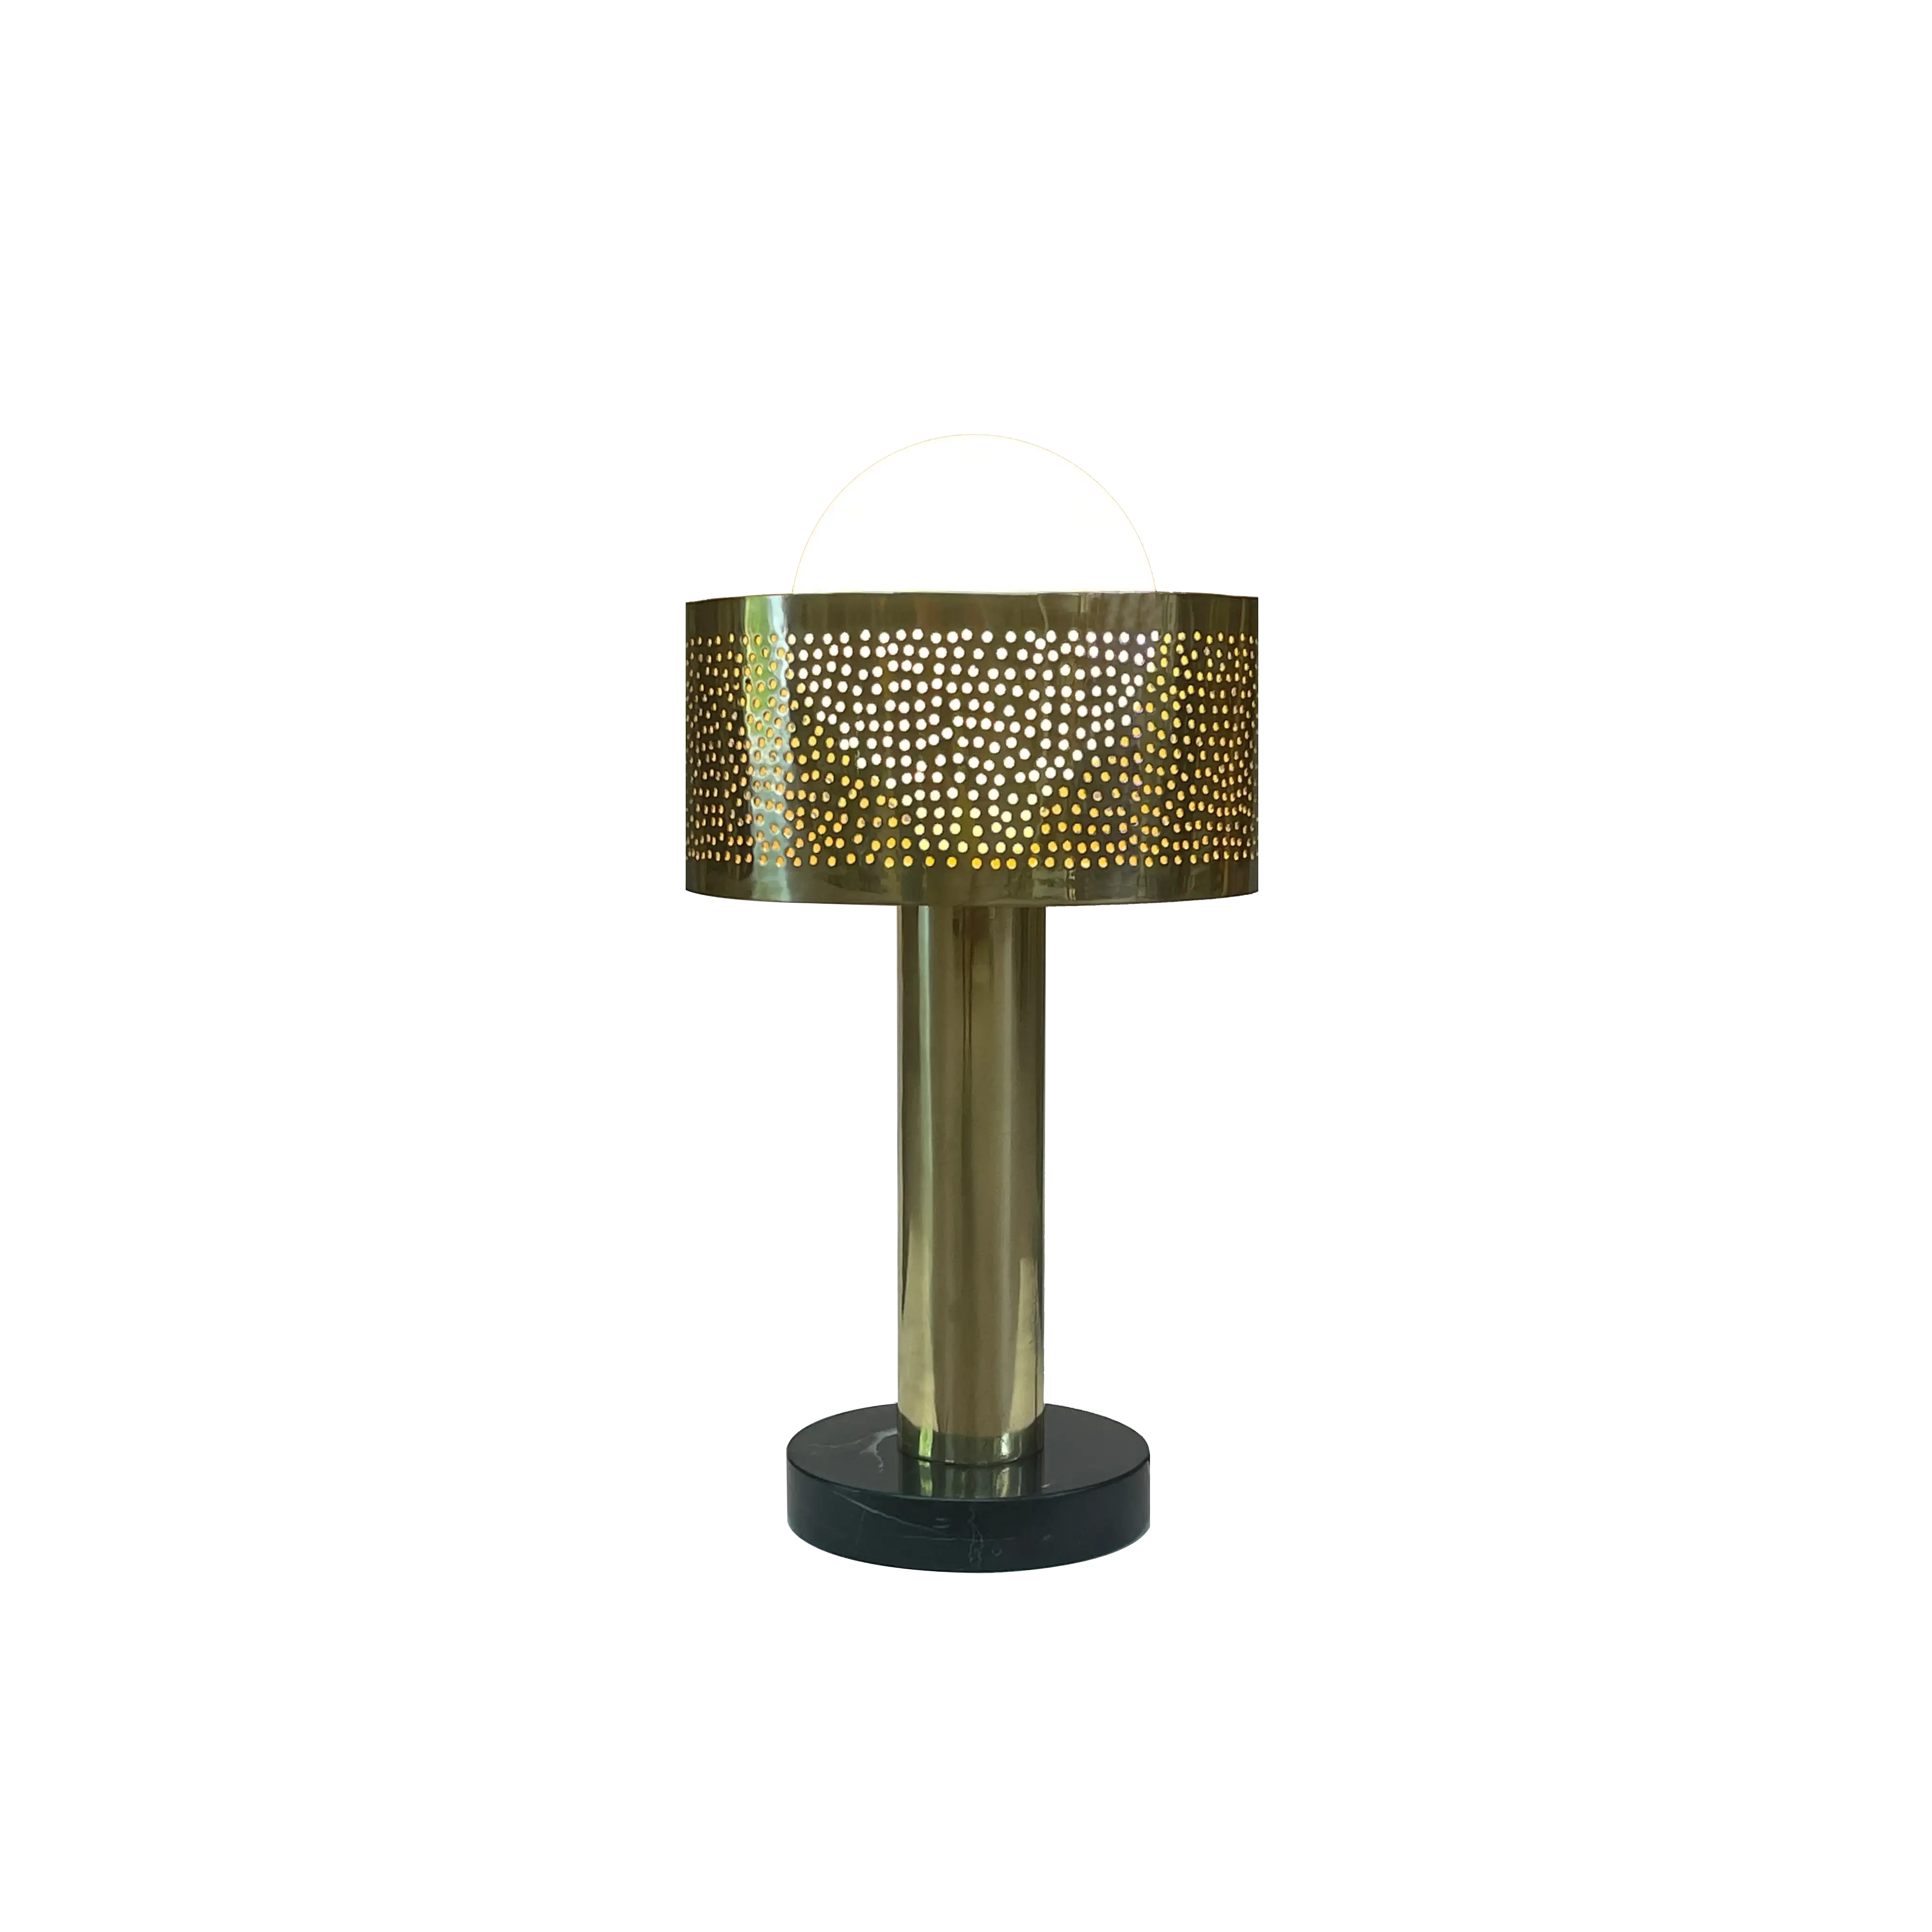 Dounia home Table lamp in antique brass  made of Metal, Model: Alula